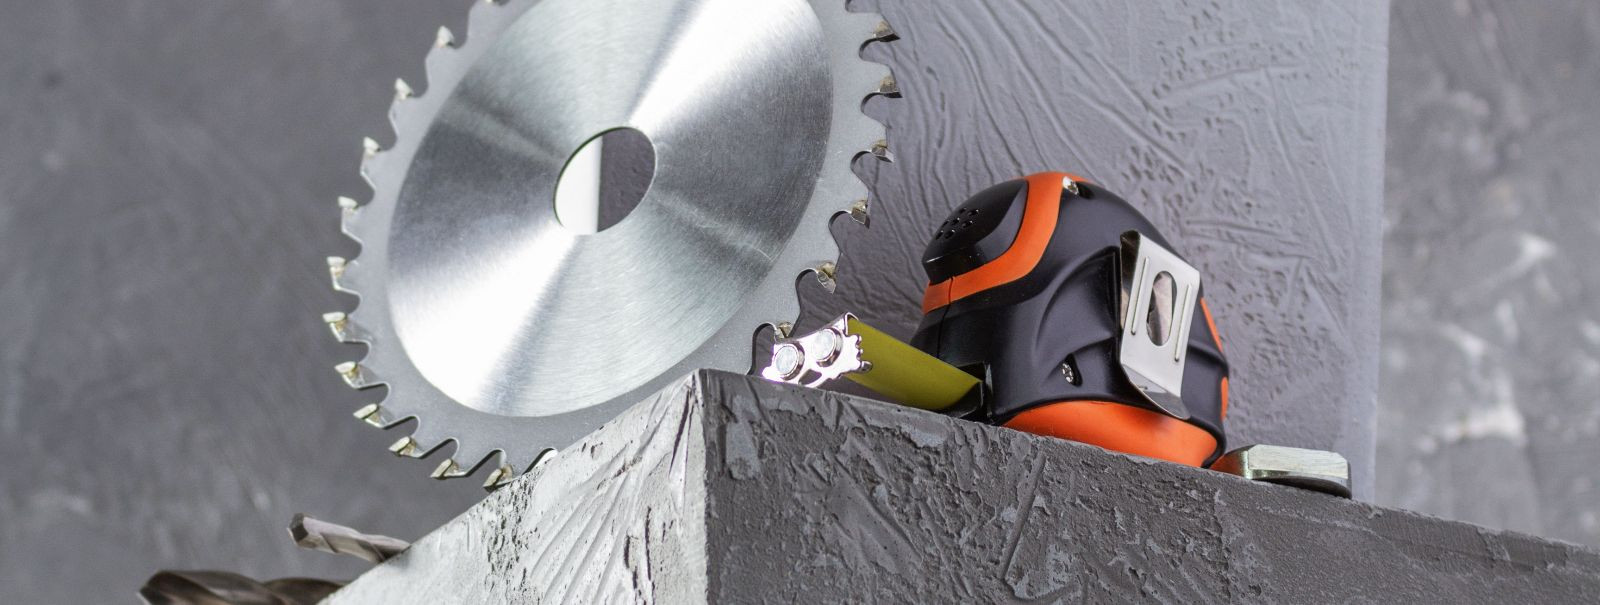 Choosing the right construction tools is not just about getting the job done. It's about ensuring efficiency, safety, and quality of work. The right tools can m